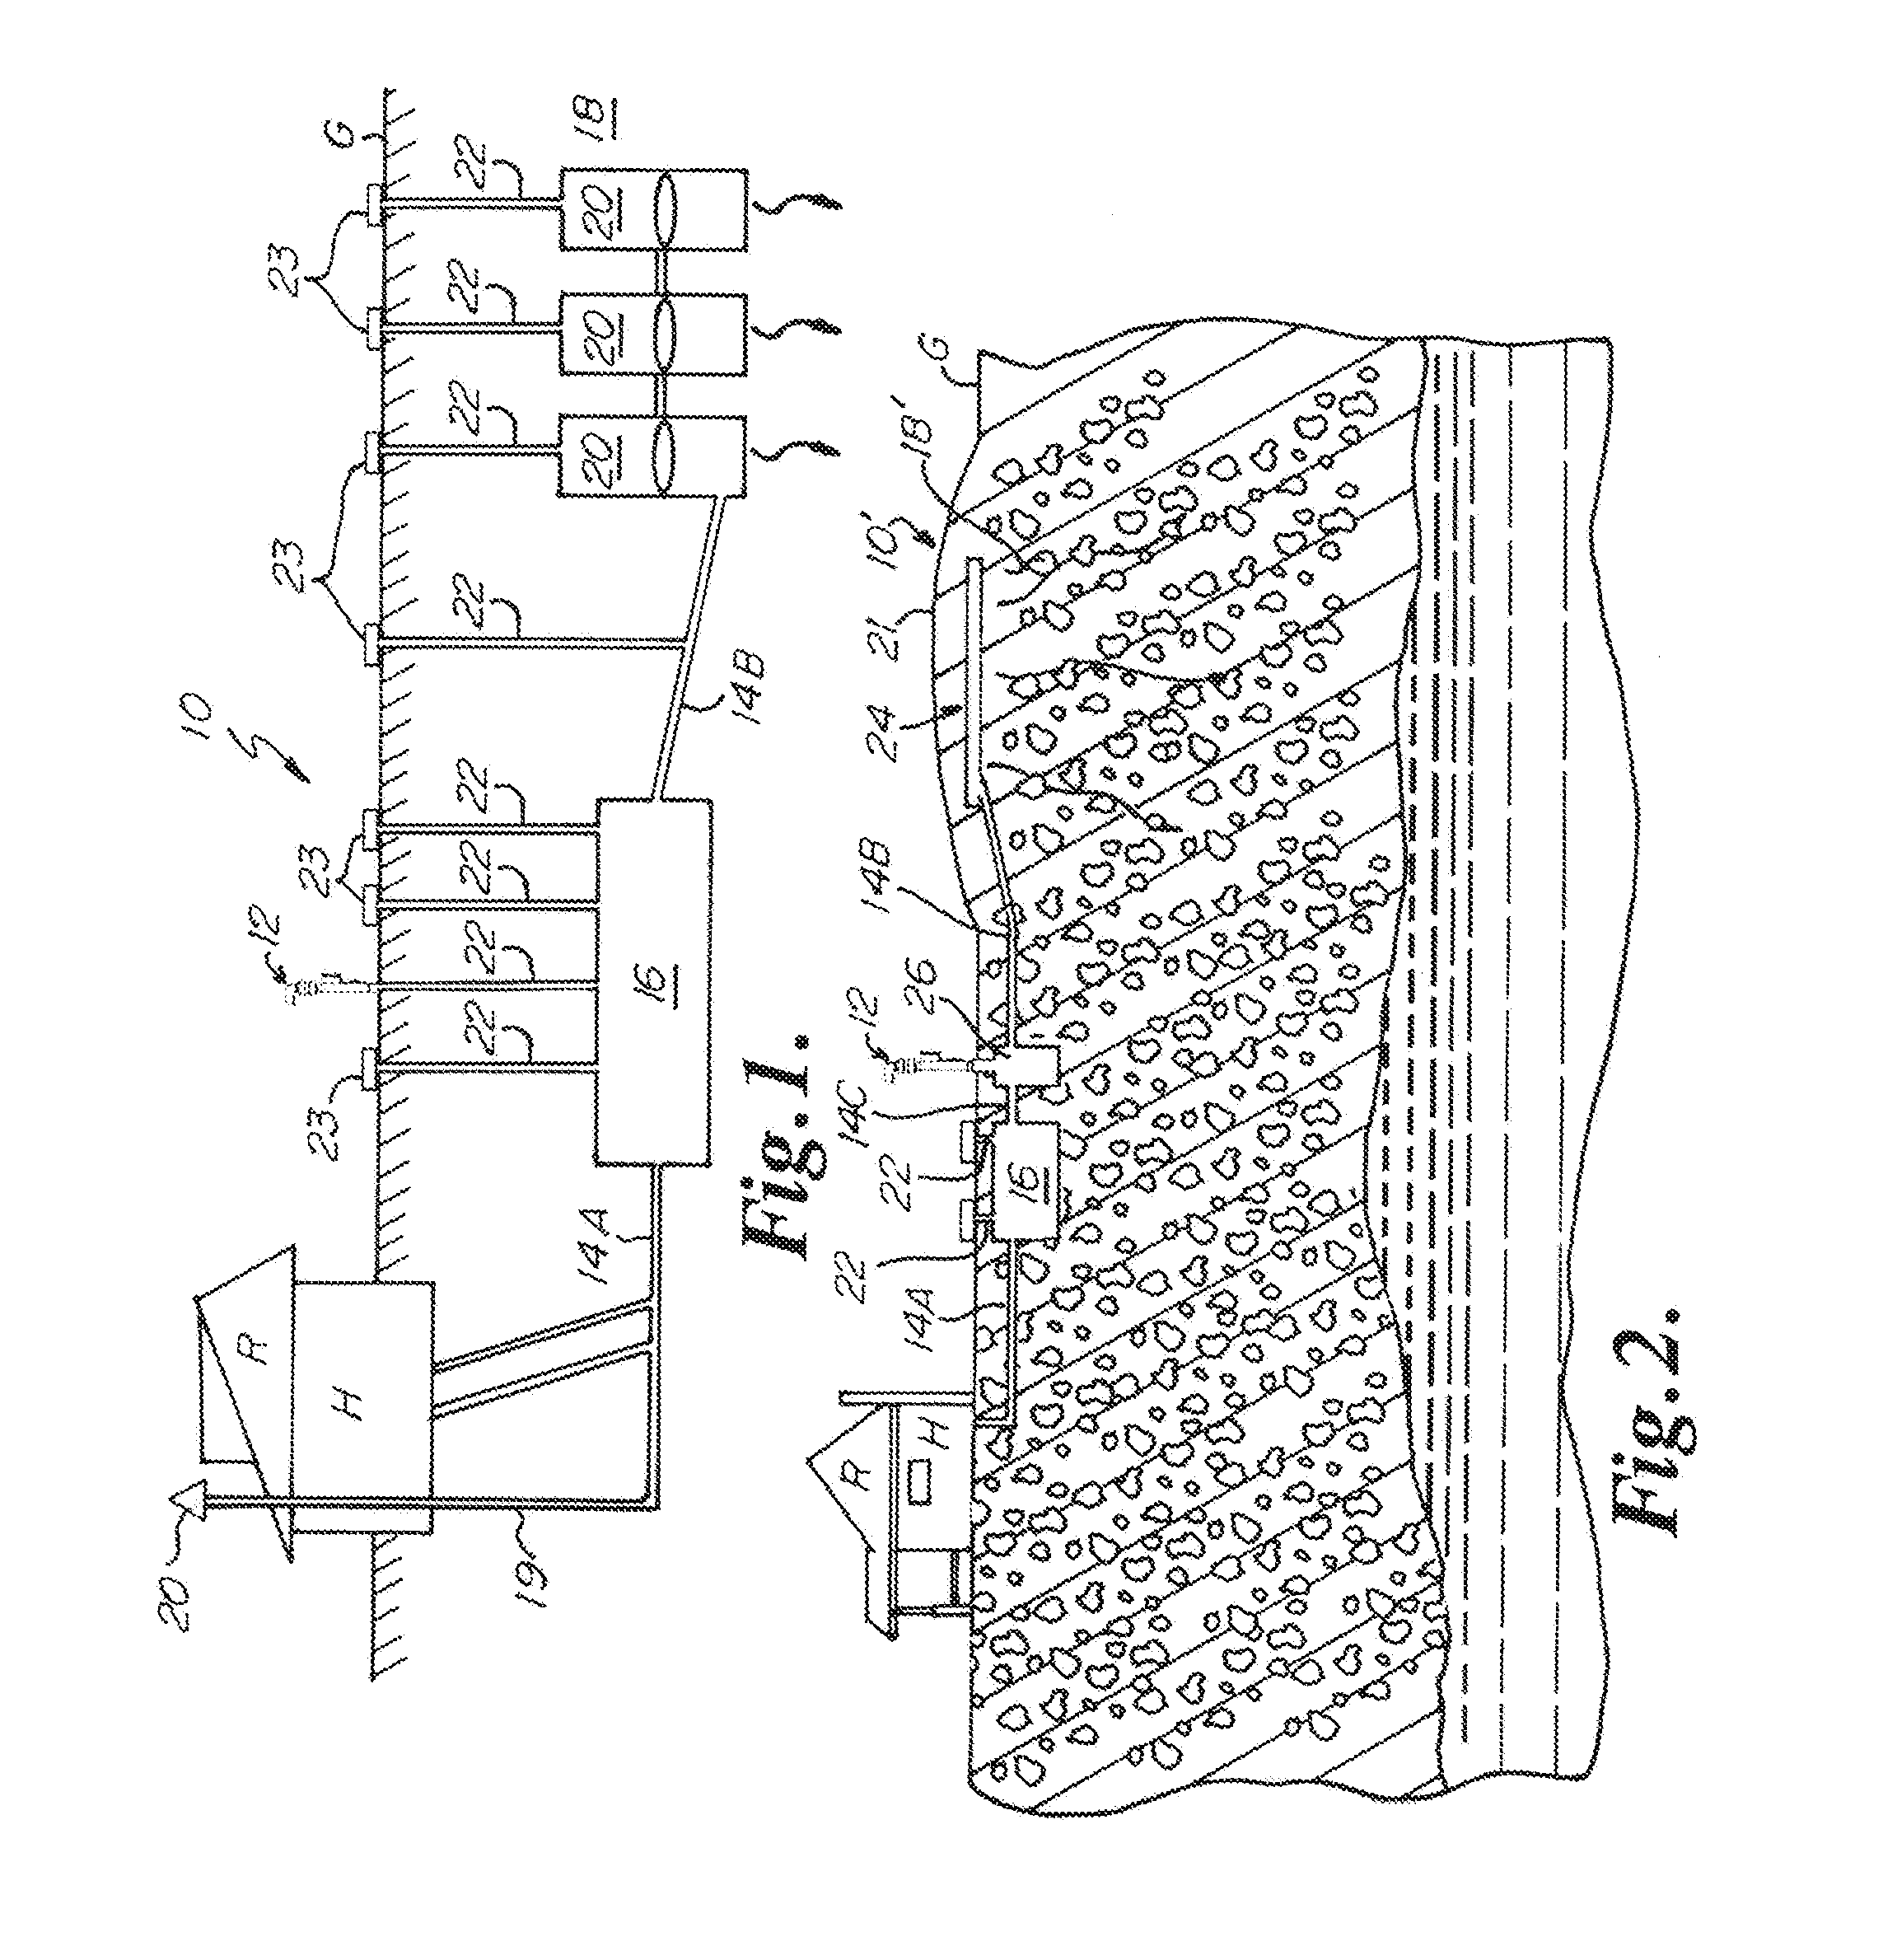 Heating system and method for prevention of underground tank freeze-ups